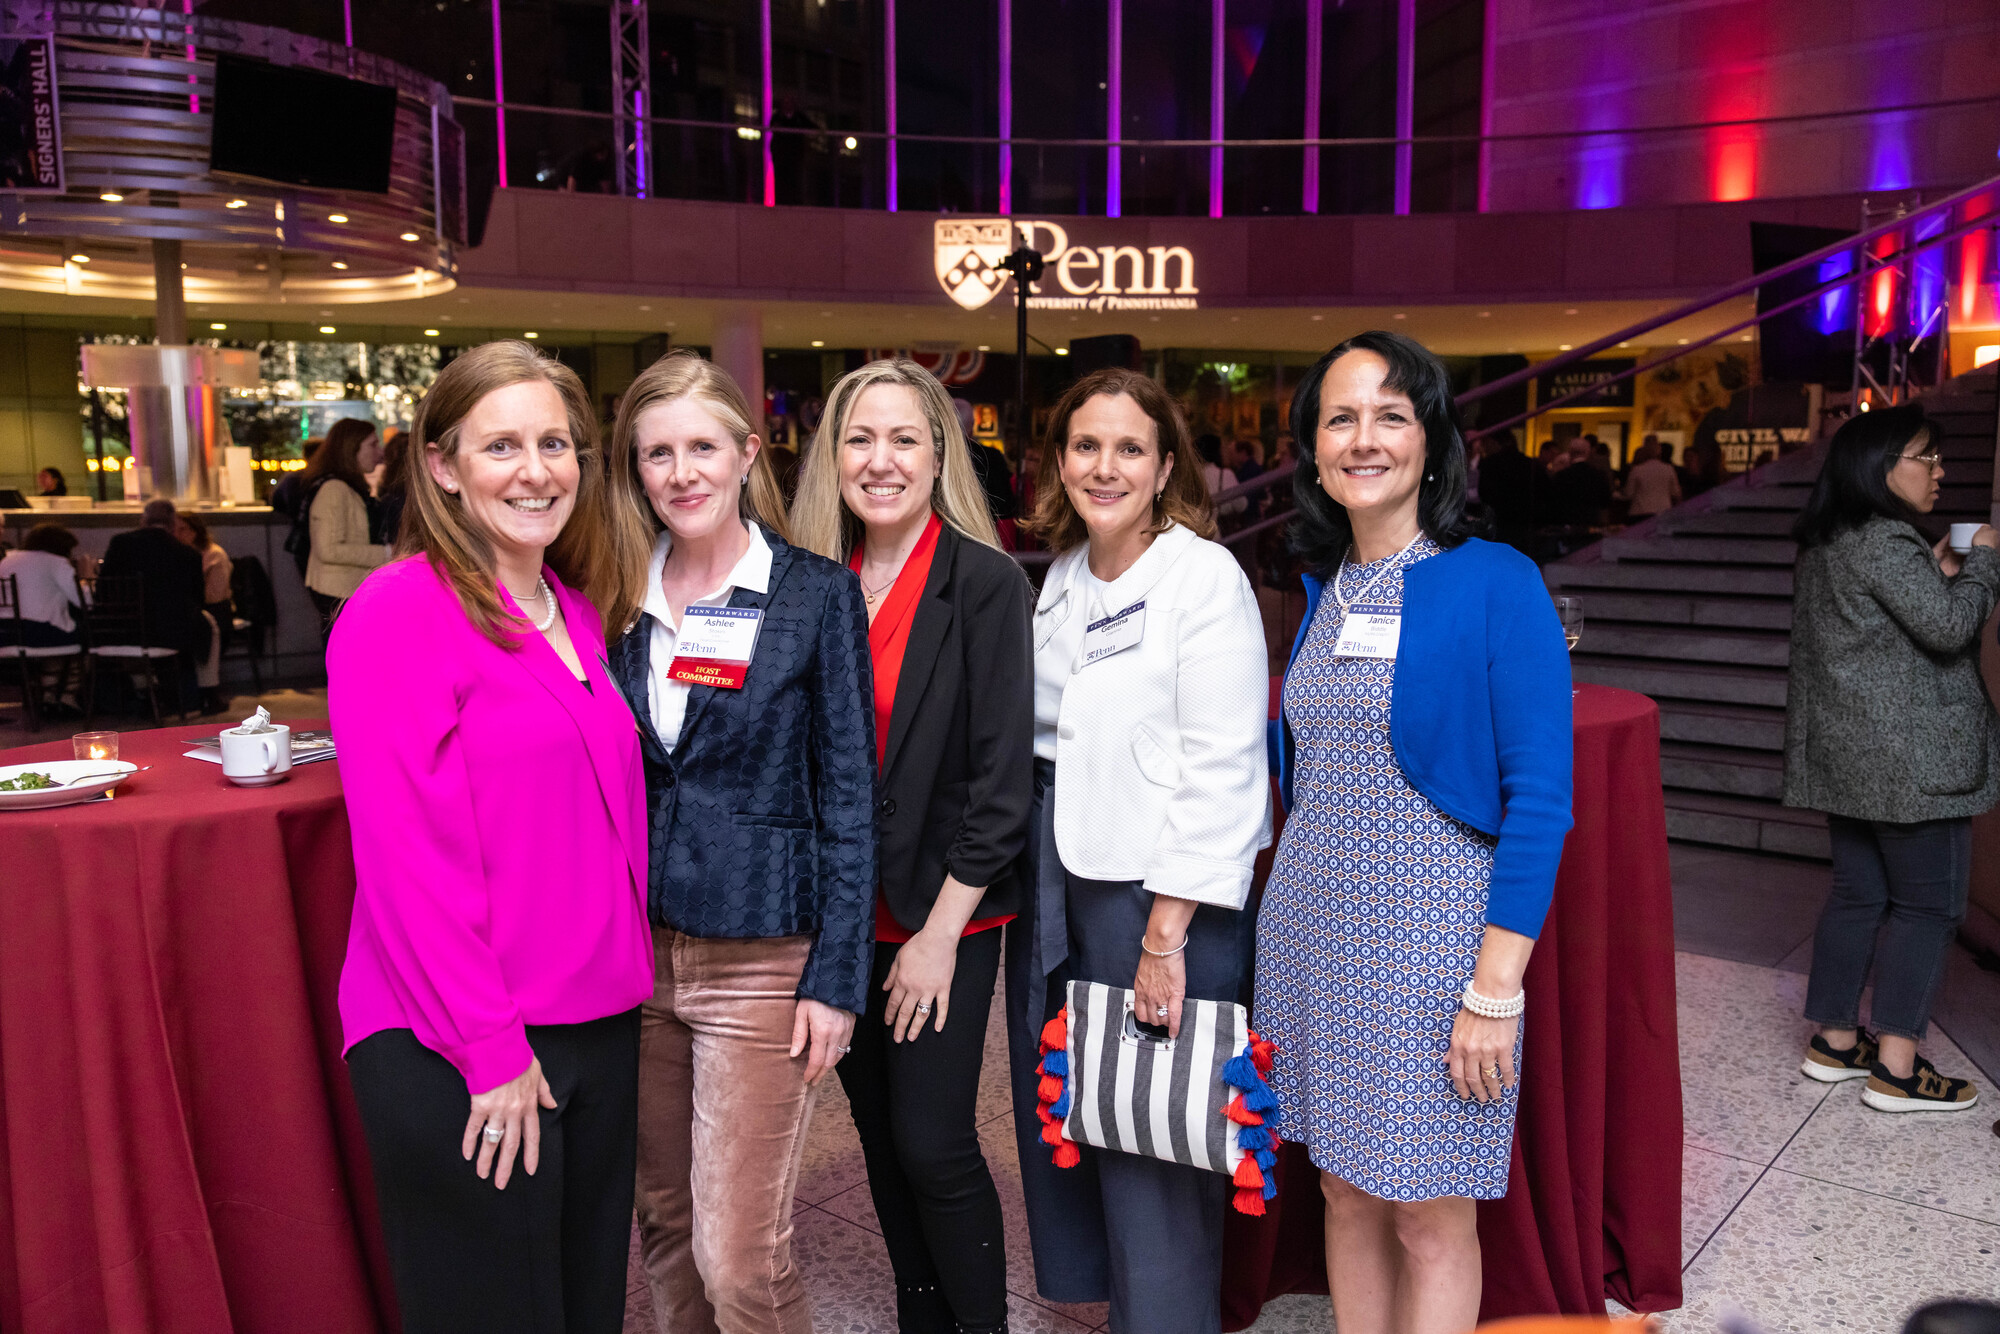 5 people smile for a photo at event with Penn branding in background